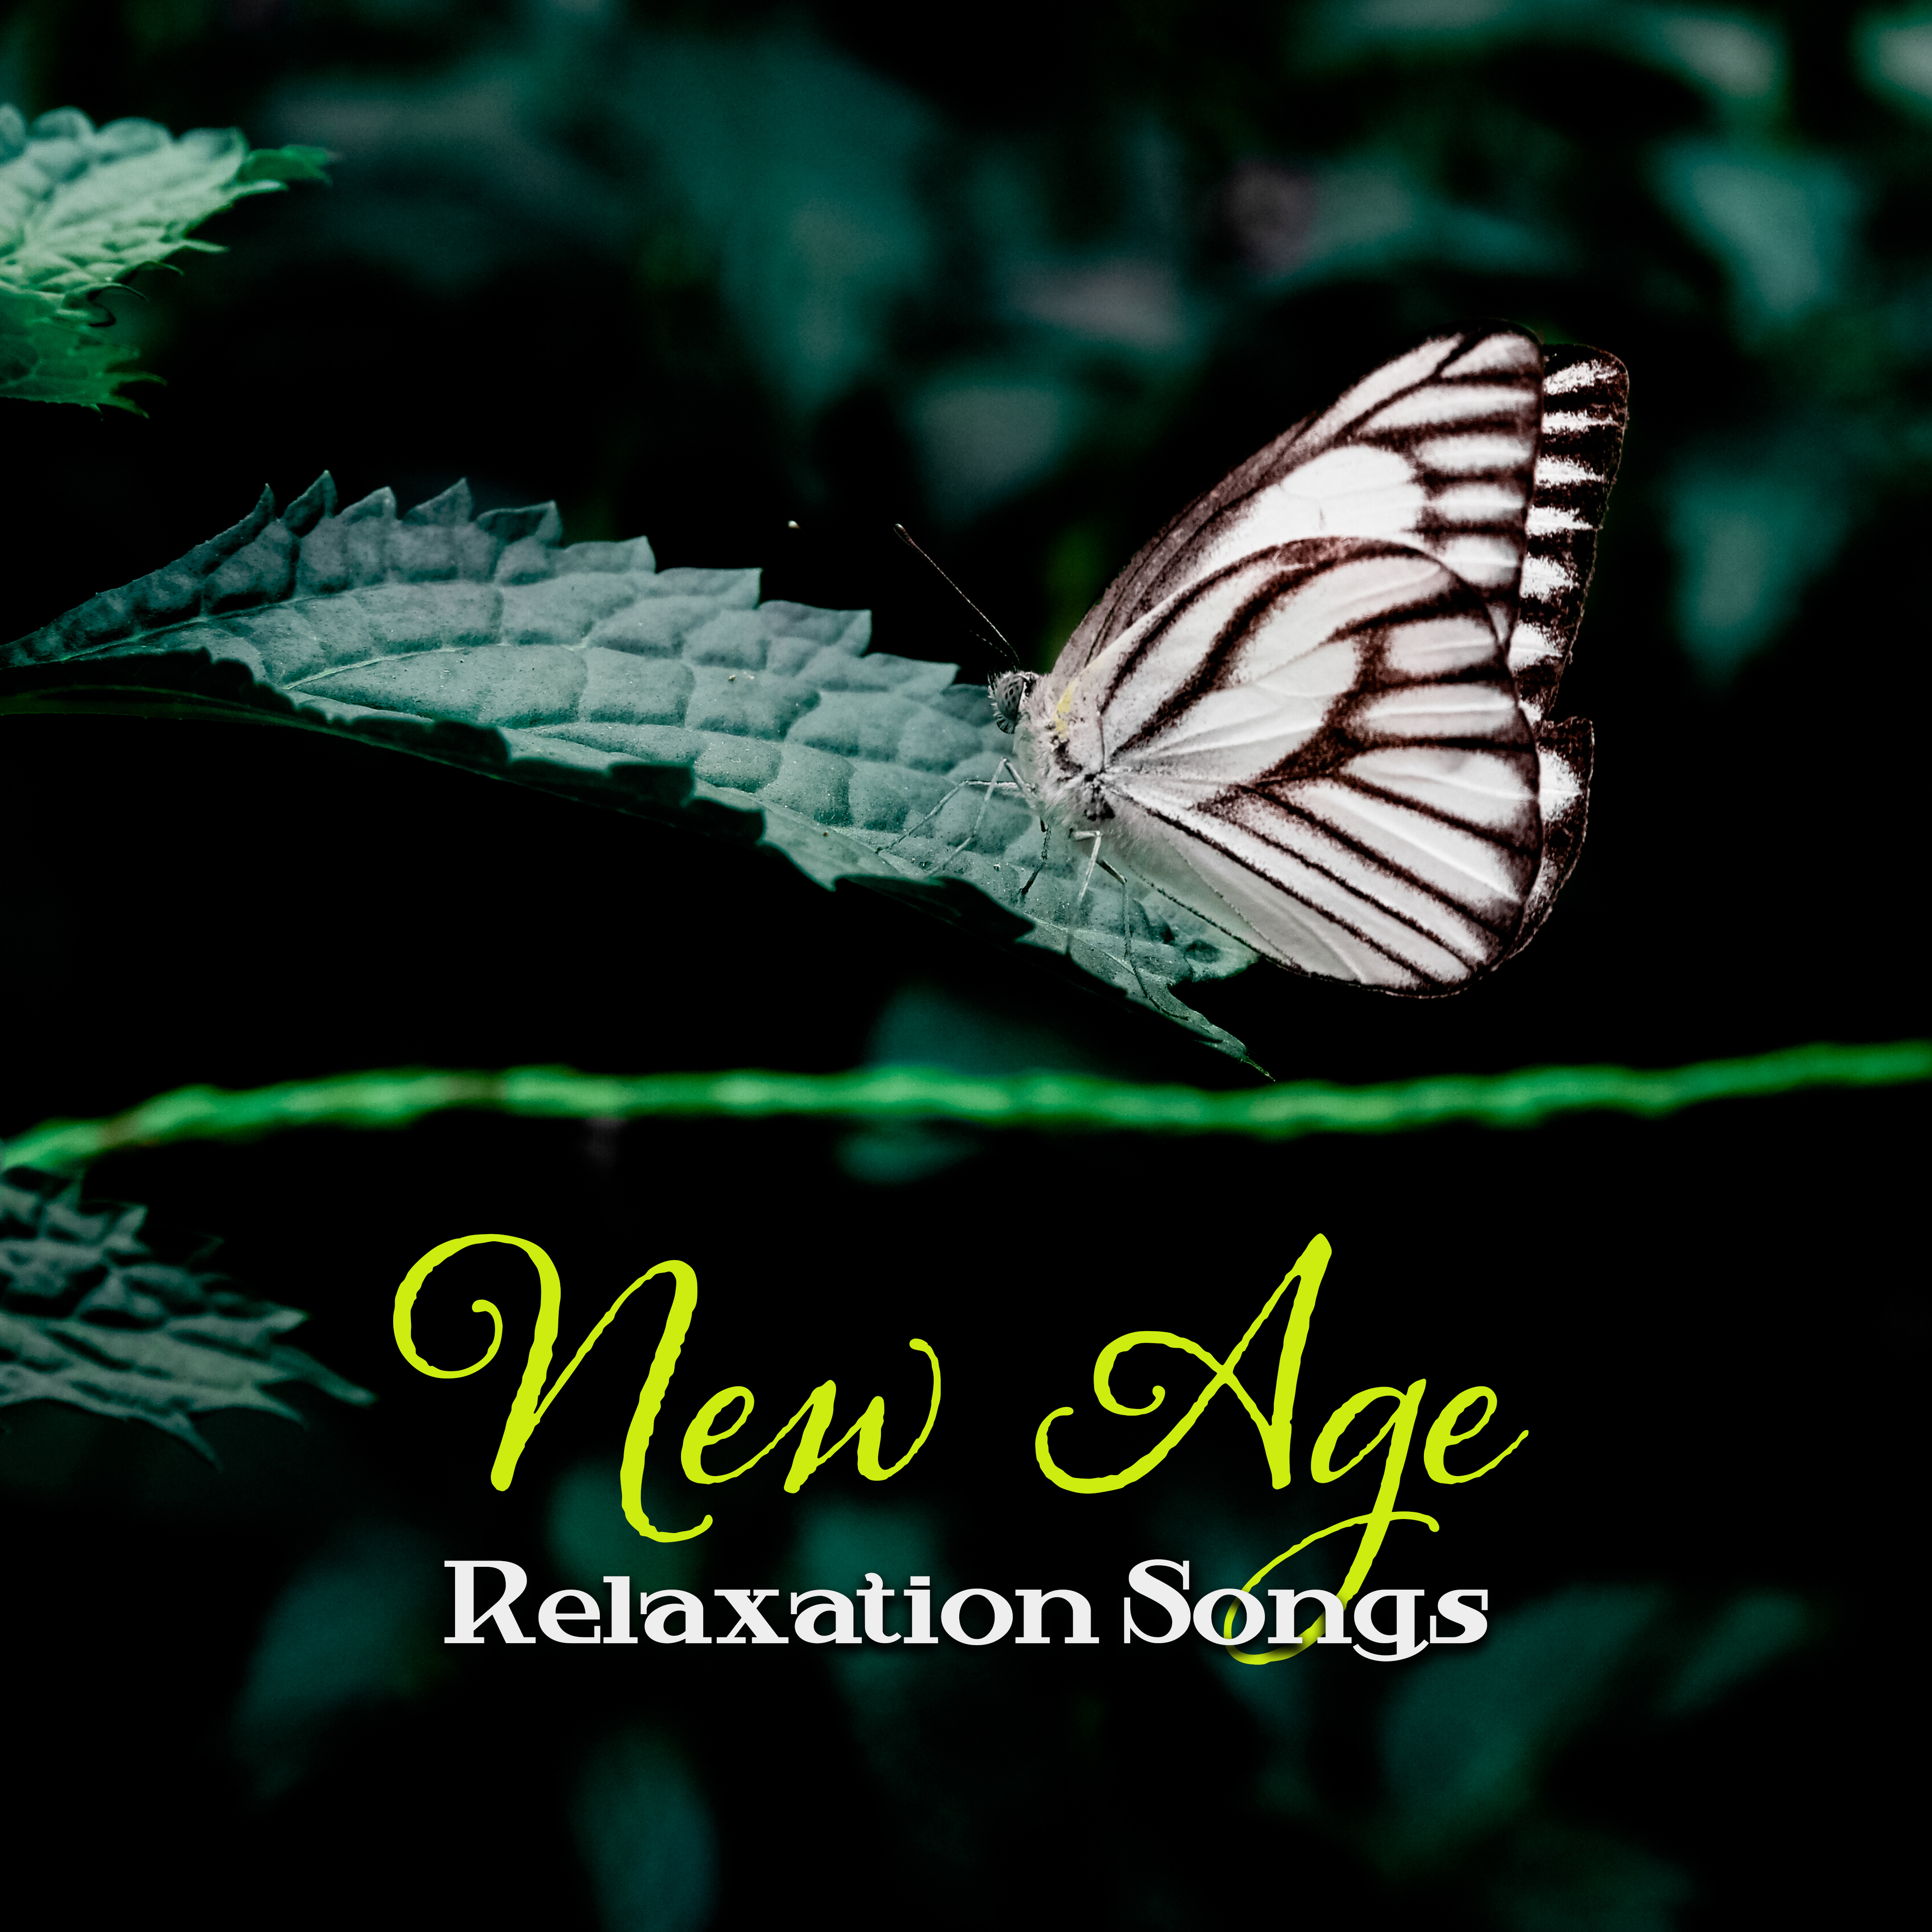 New Age Relaxation Songs  Relaxing New Age Songs, Peaceful Music to Rest, Time for You, Chilled Melodies for Your Mind  Body